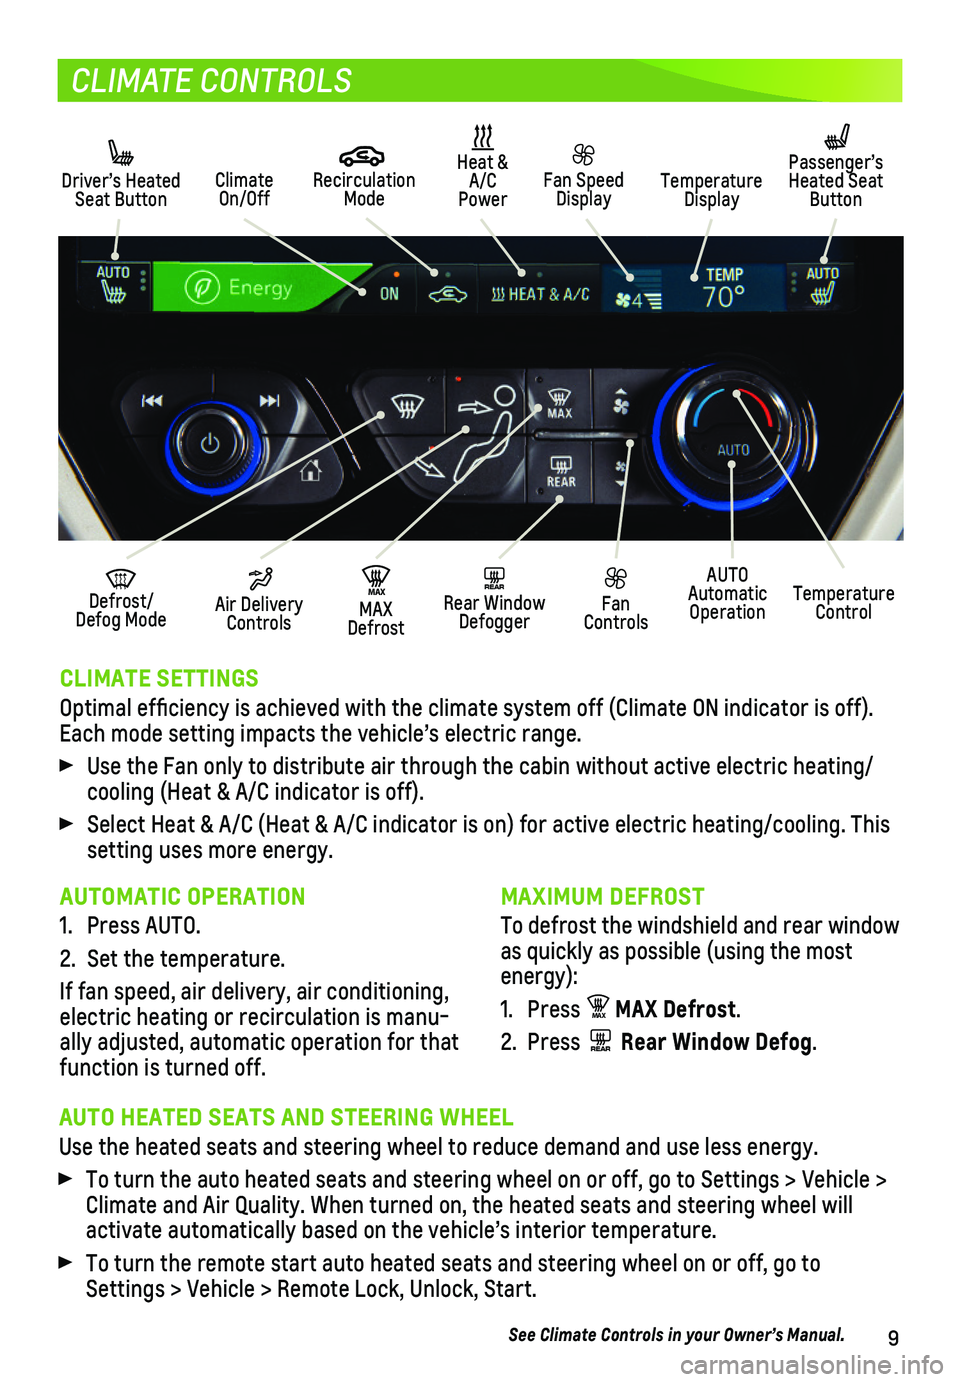 CHEVROLET BOLT EV 2018  Get To Know Guide 9
CLIMATE CONTROLS
CLIMATE SETTINGS 
Optimal efficiency is achieved with the climate system off (Climate O\
N indicator is off). Each mode setting impacts the vehicle’s electric range. 
 Use the Fan